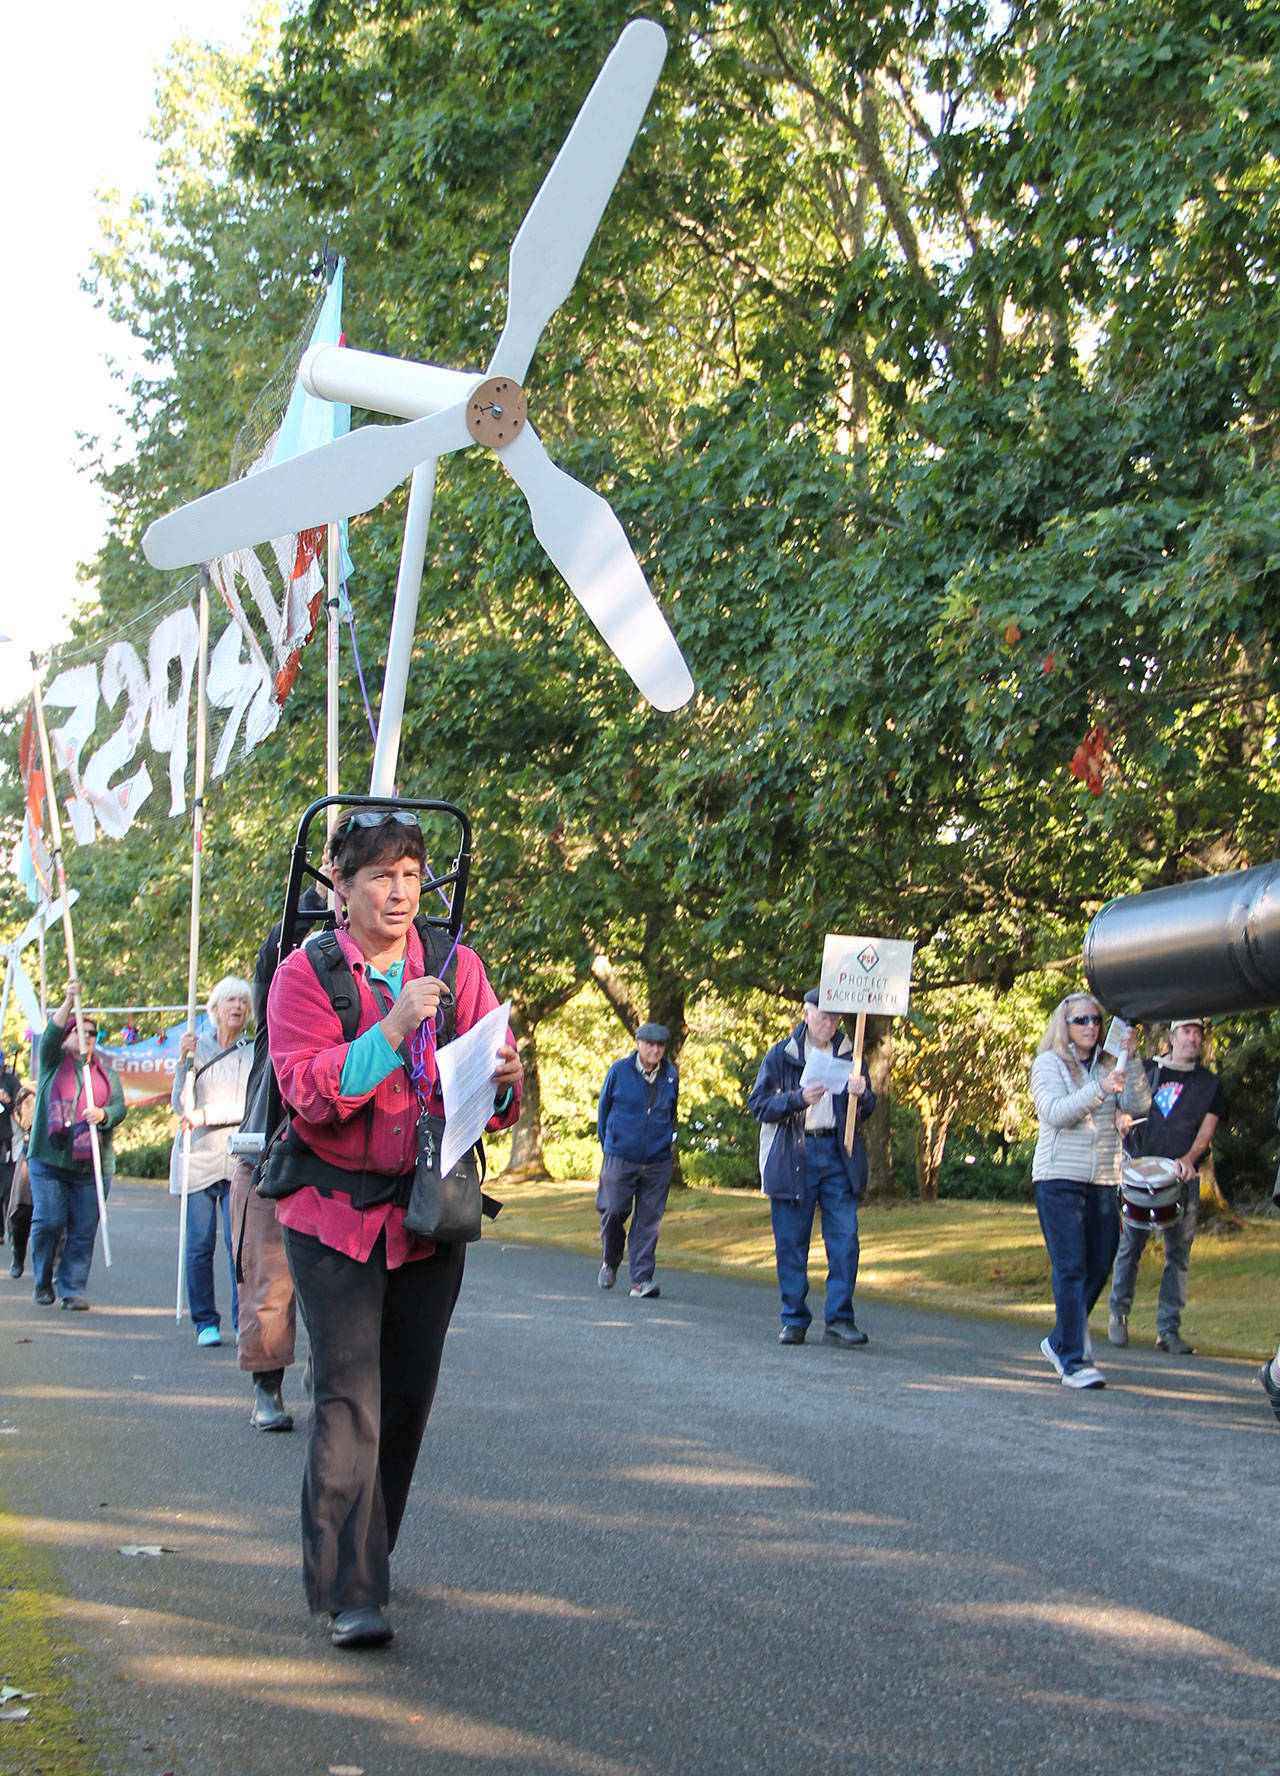 Islander Trish Howard wears a Backbone Campaign backpack featuring a wind turbine during the PSE Regional Day of Action demonstration on Vashon. (Anneli Fogt/Staff Photo)